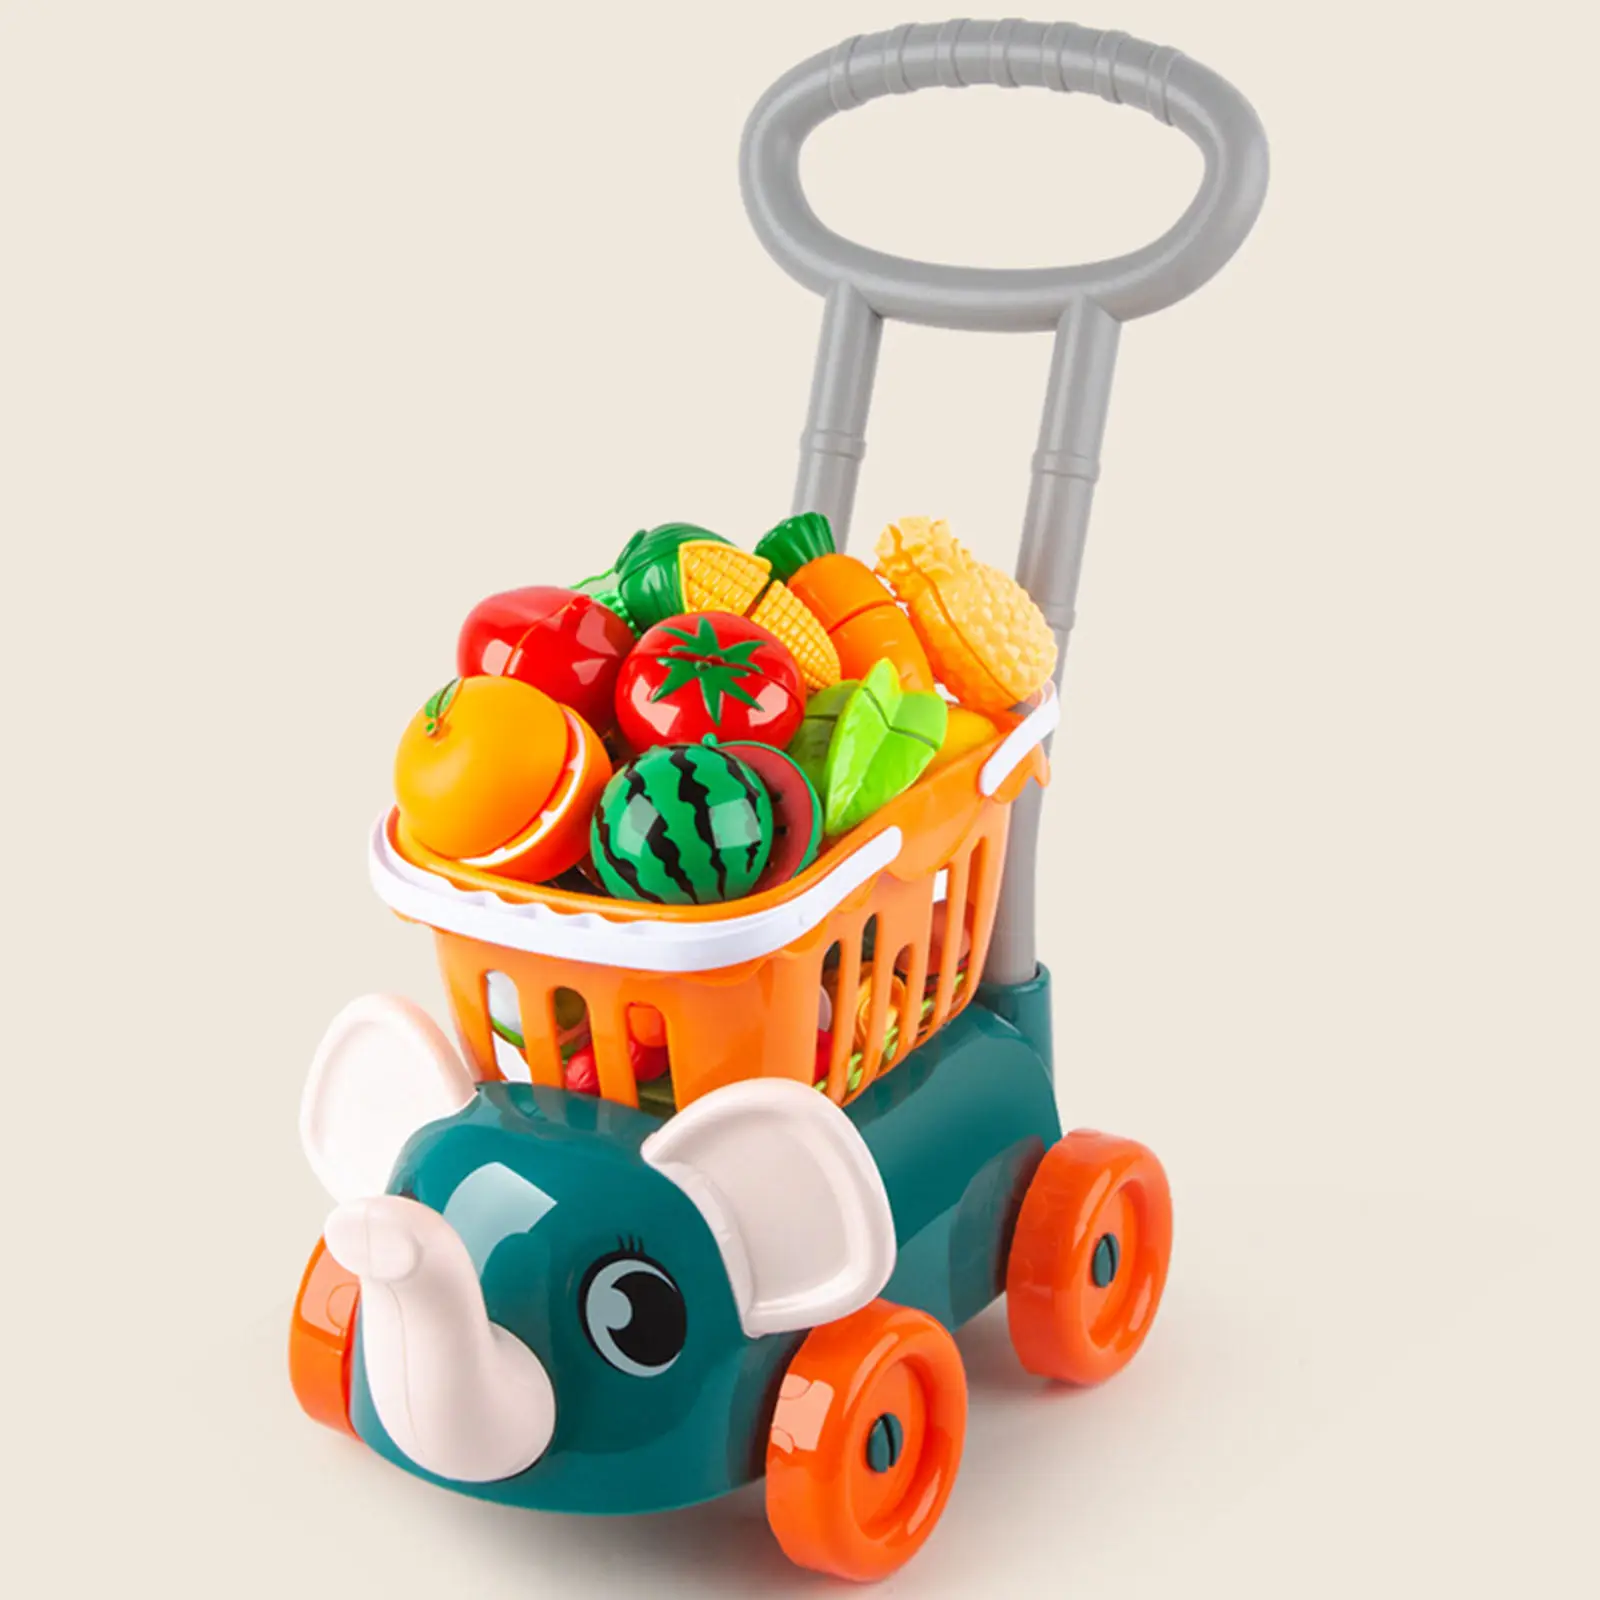 Deluxe Shopping Trolley Cutting Food Educational Toys for Children